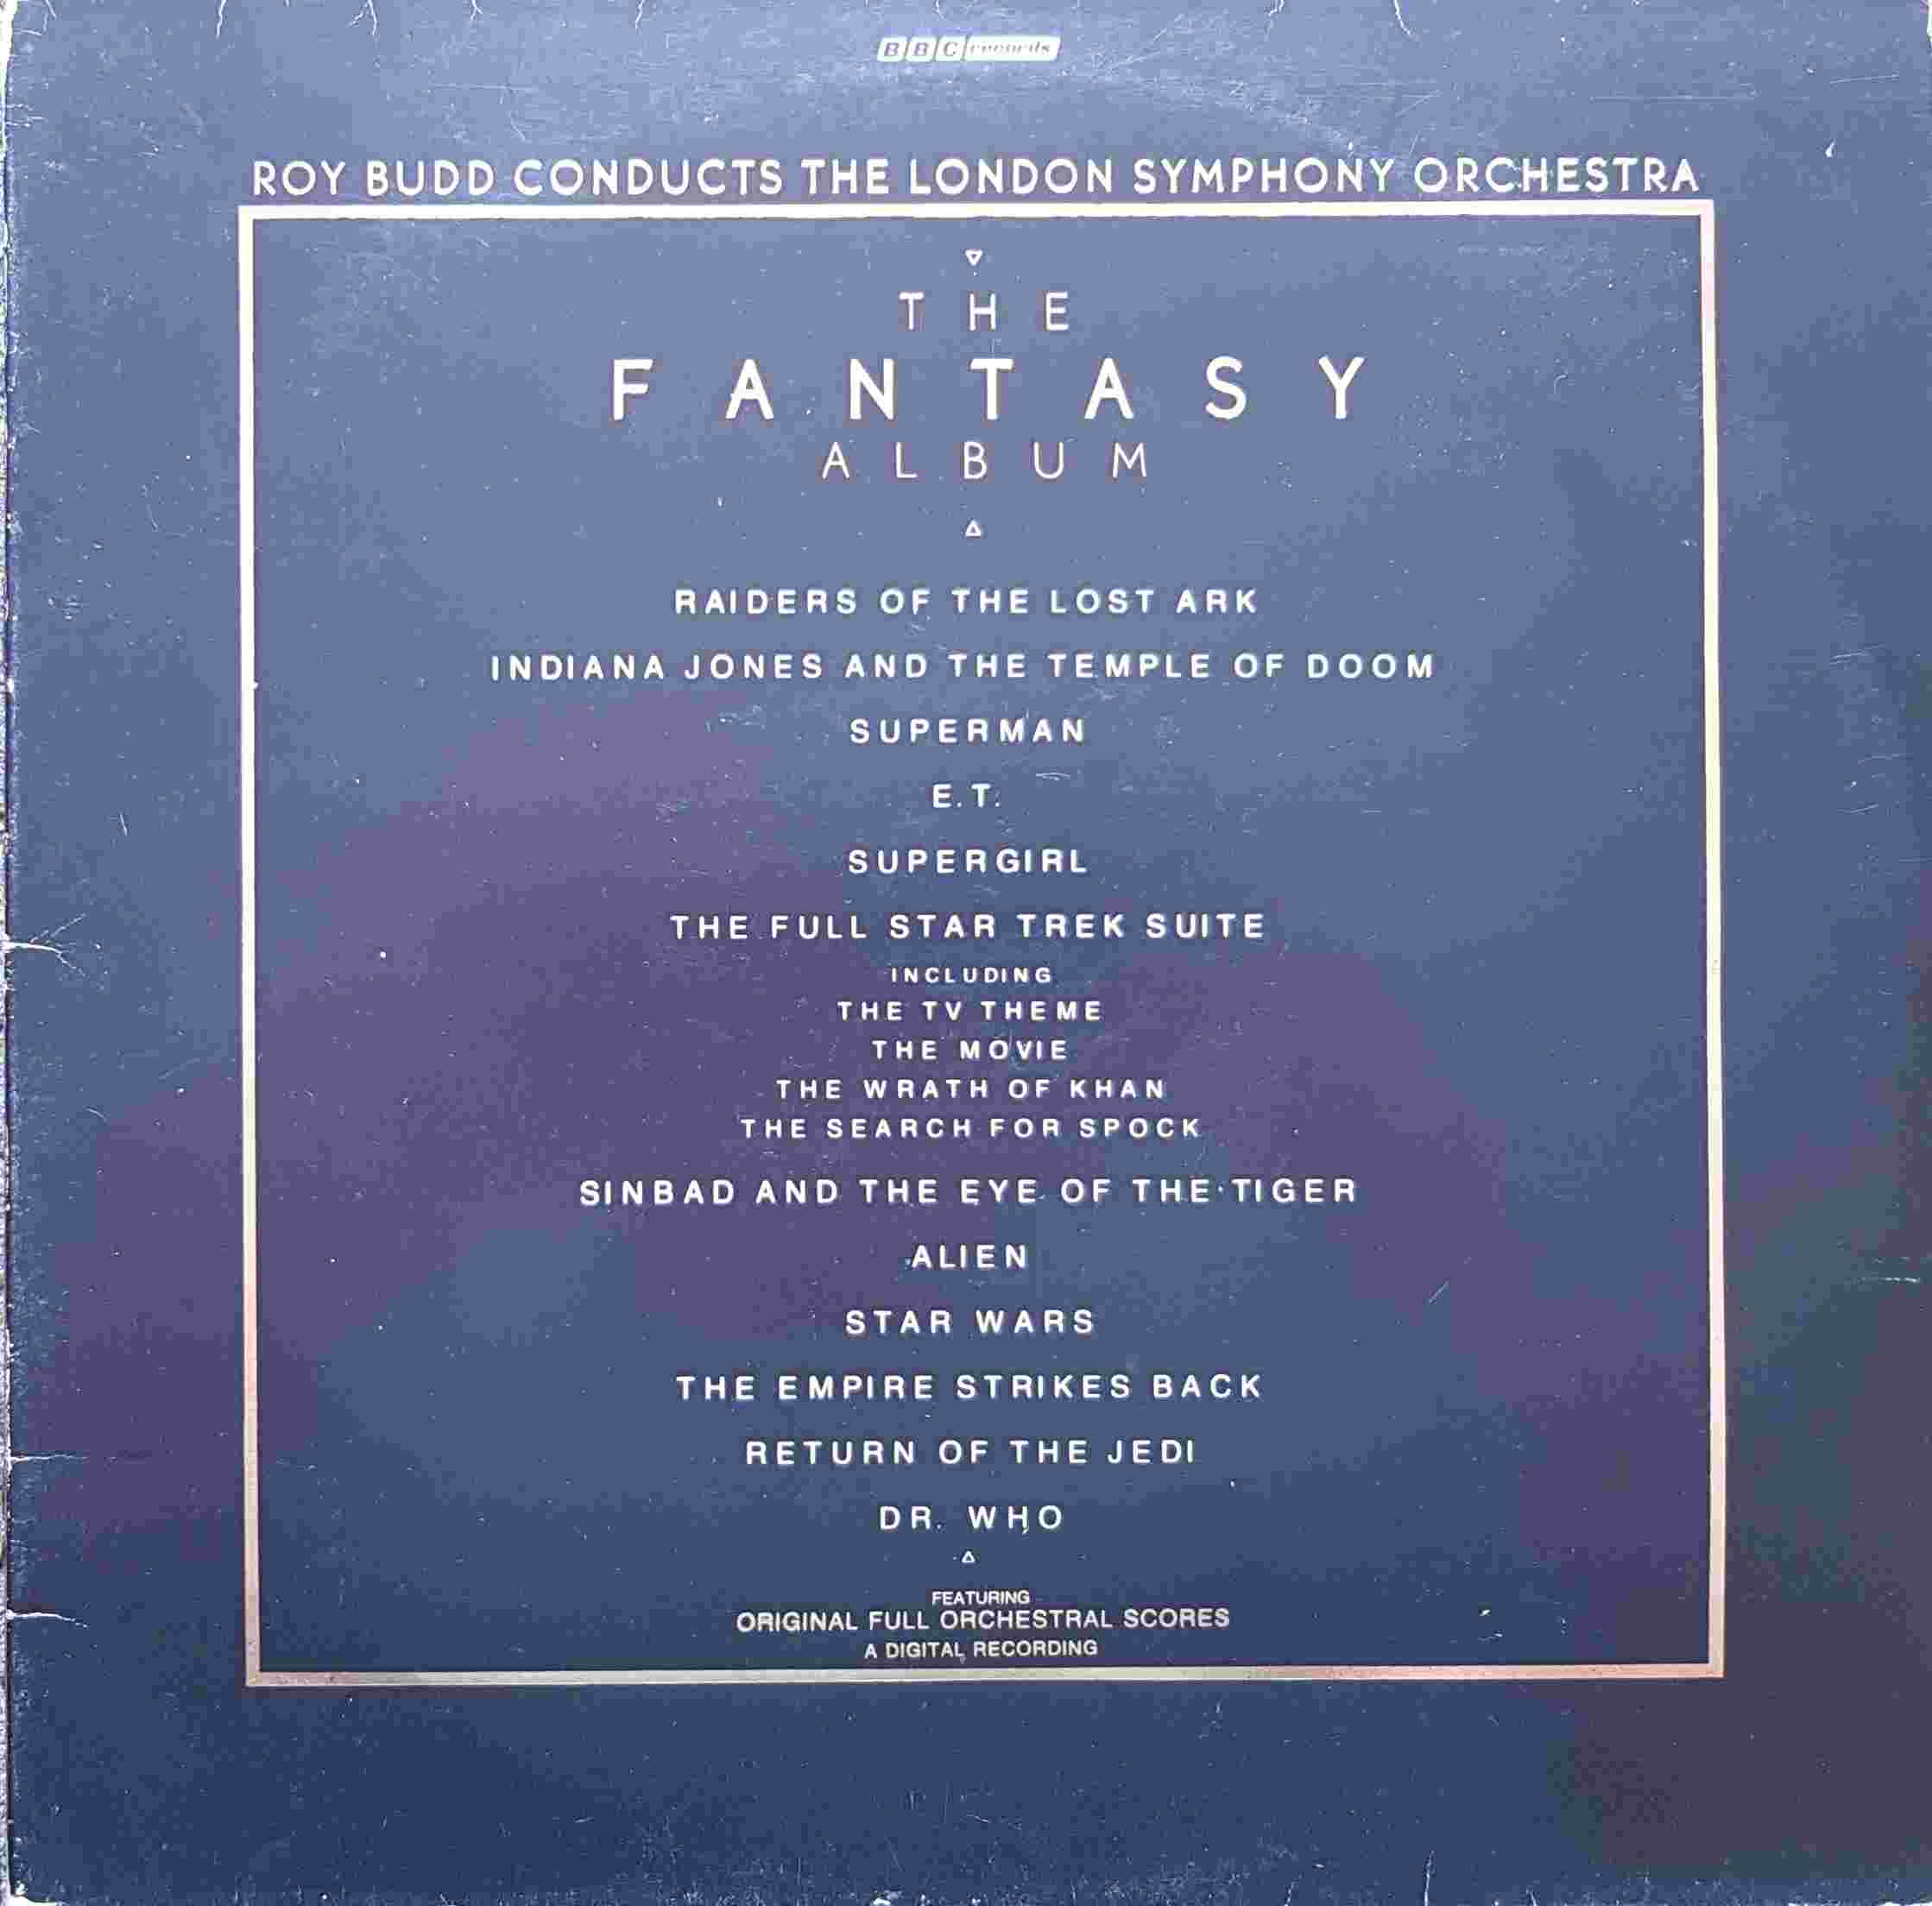 Picture of REF 547 Fantasy album by artist London symphony orchestra from the BBC albums - Records and Tapes library